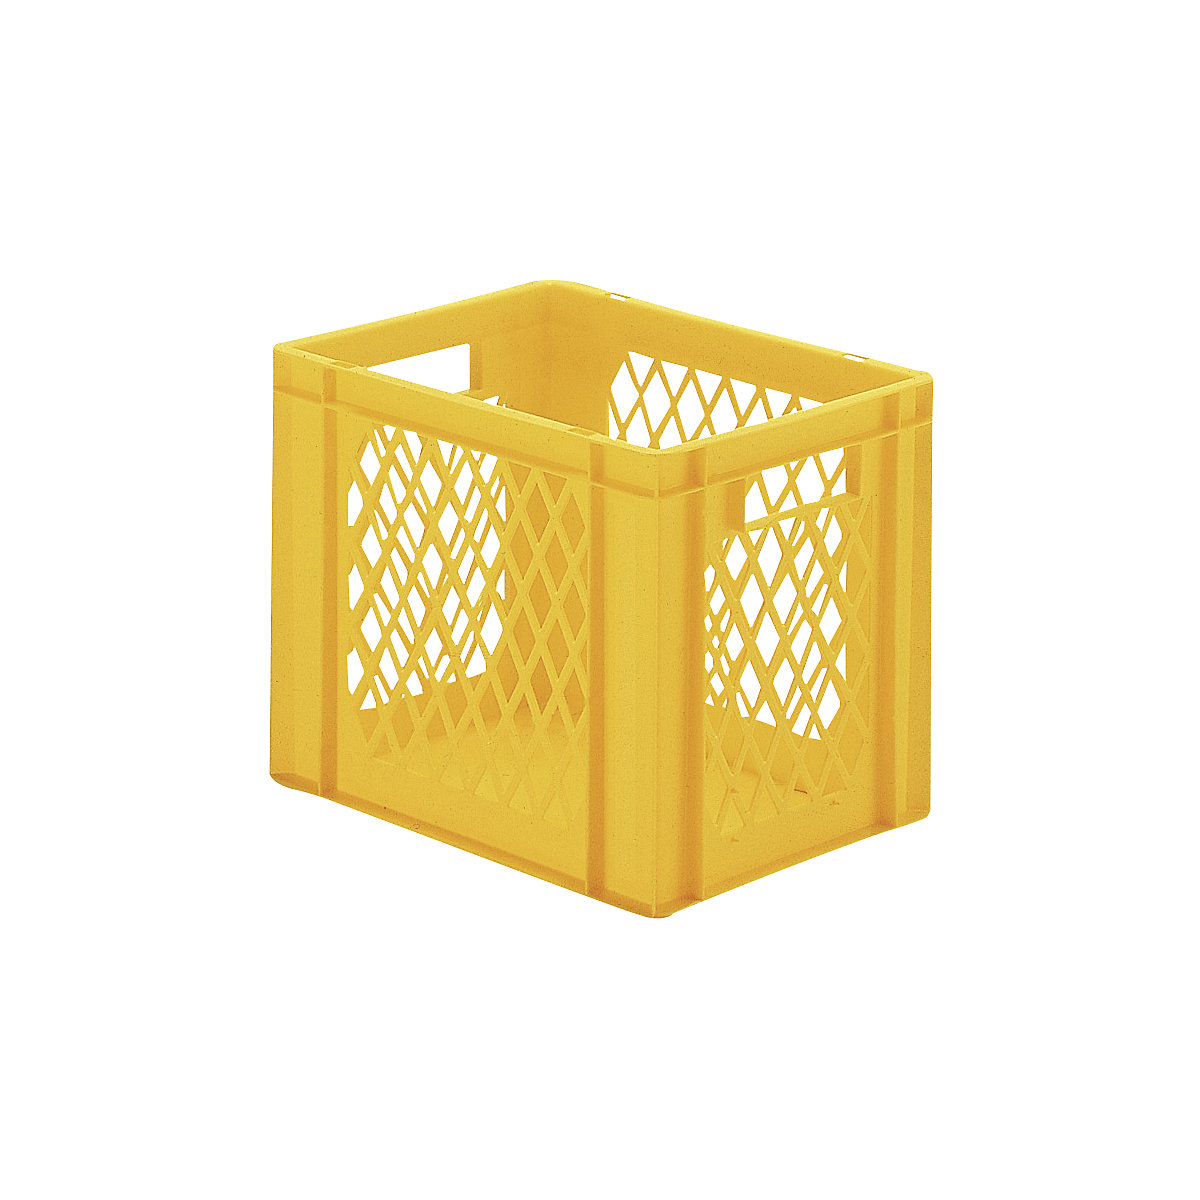 Euro stacking container, perforated walls, closed base, LxWxH 400 x 300 x 320 mm, yellow, pack of 5